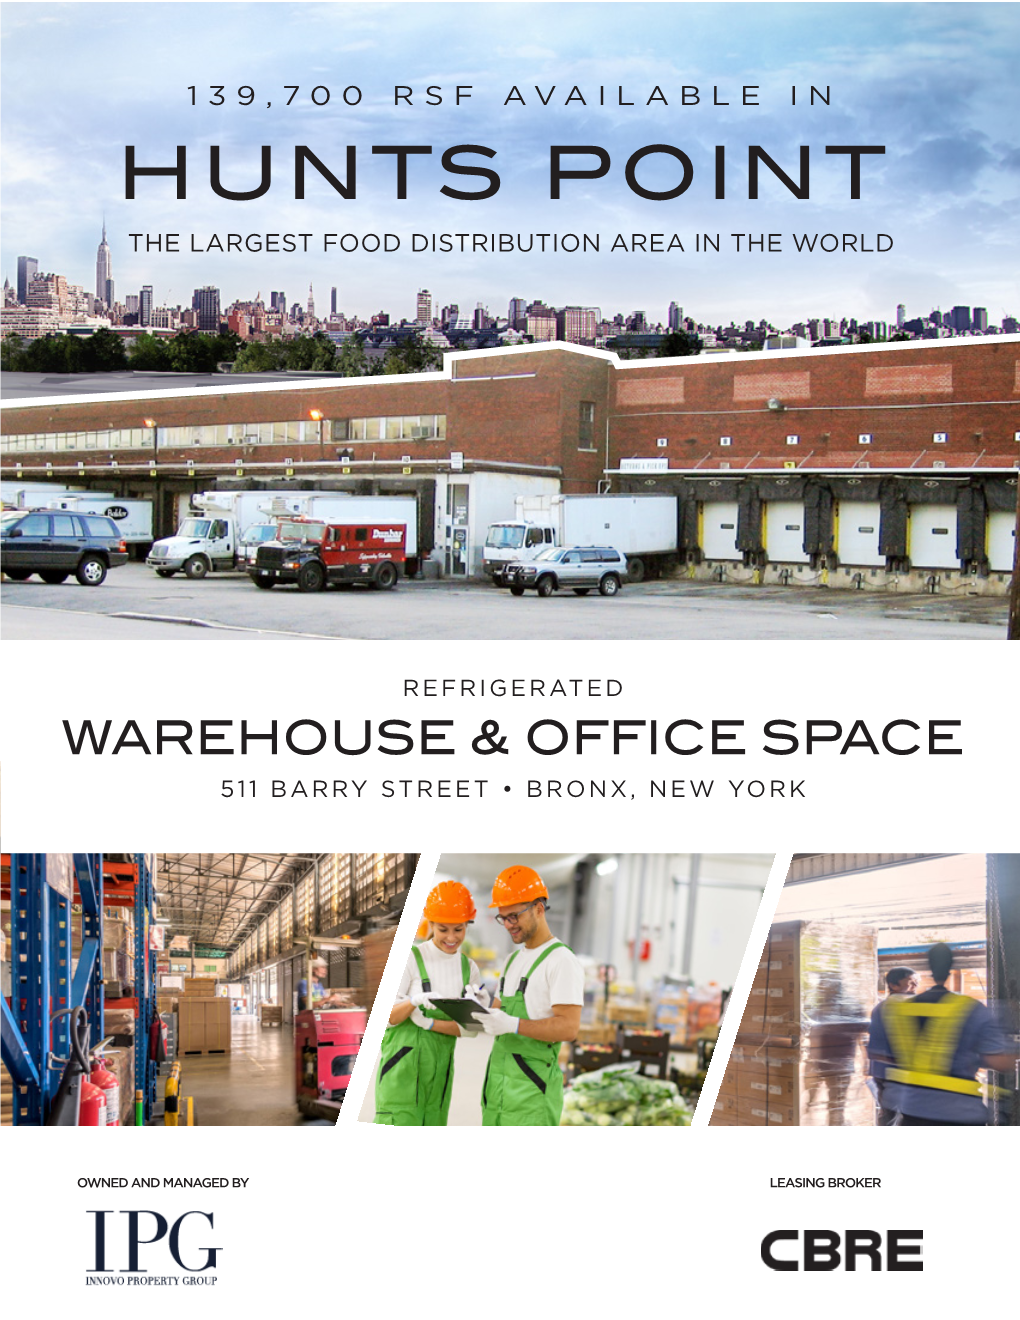 Hunts Point the Largest Food Distribution Area in the World